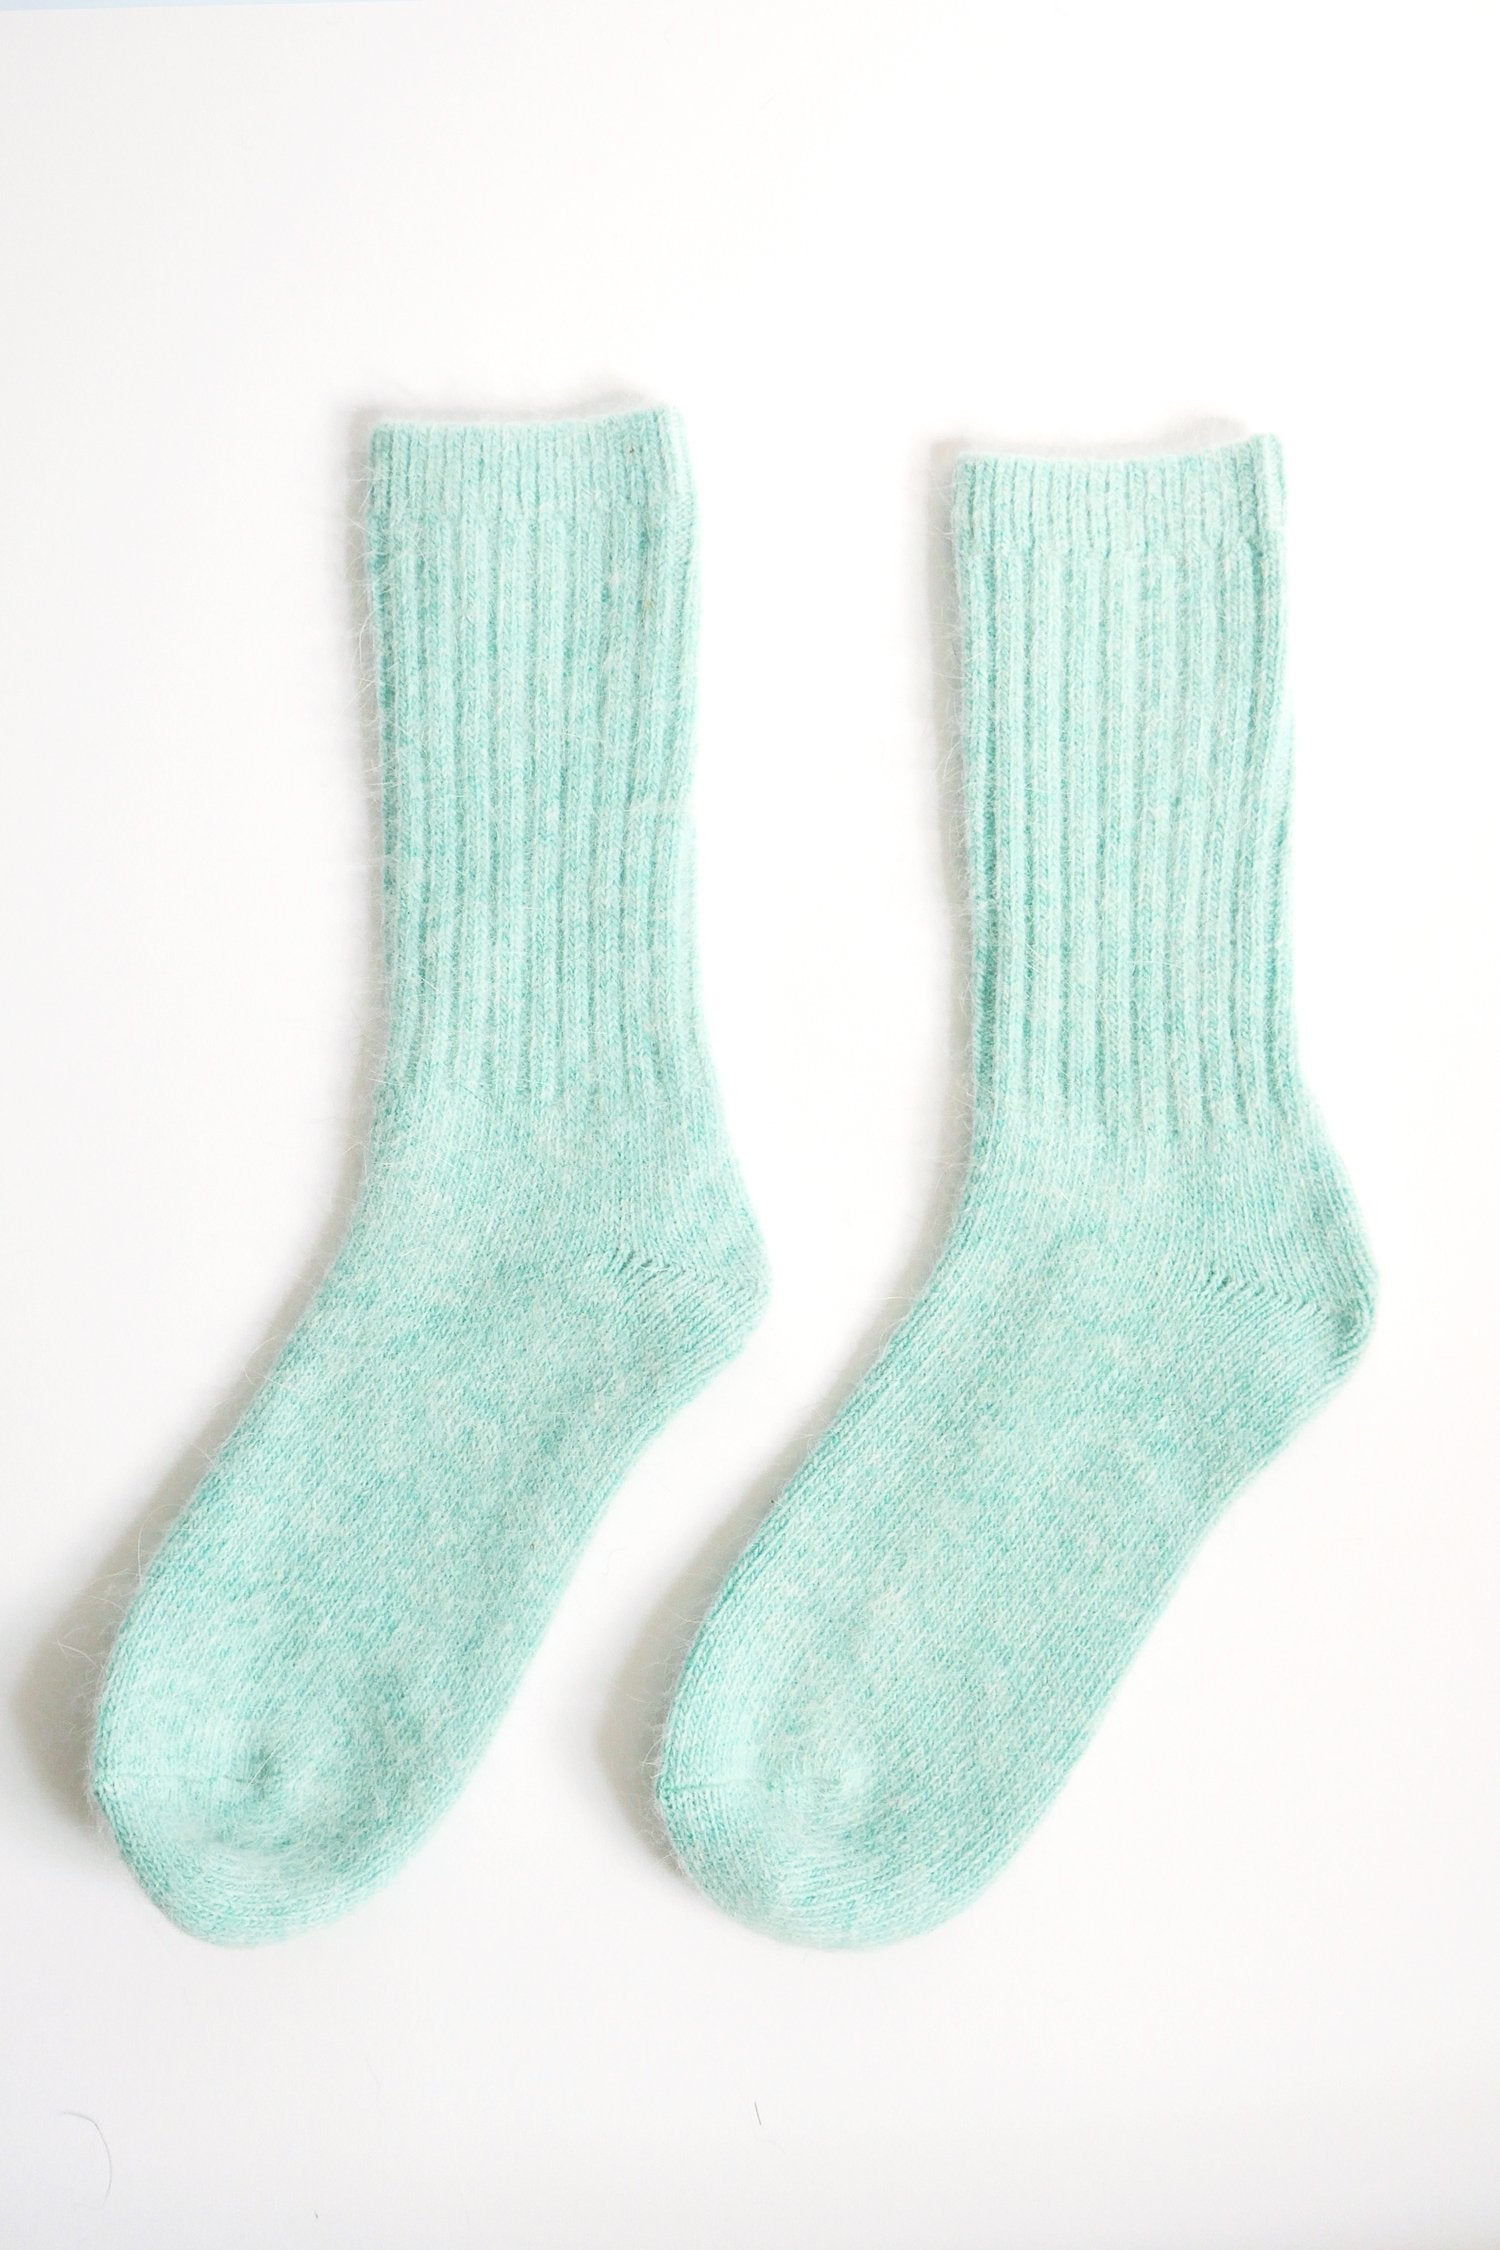 Skies For Miles soft Angora wool socks in mint color